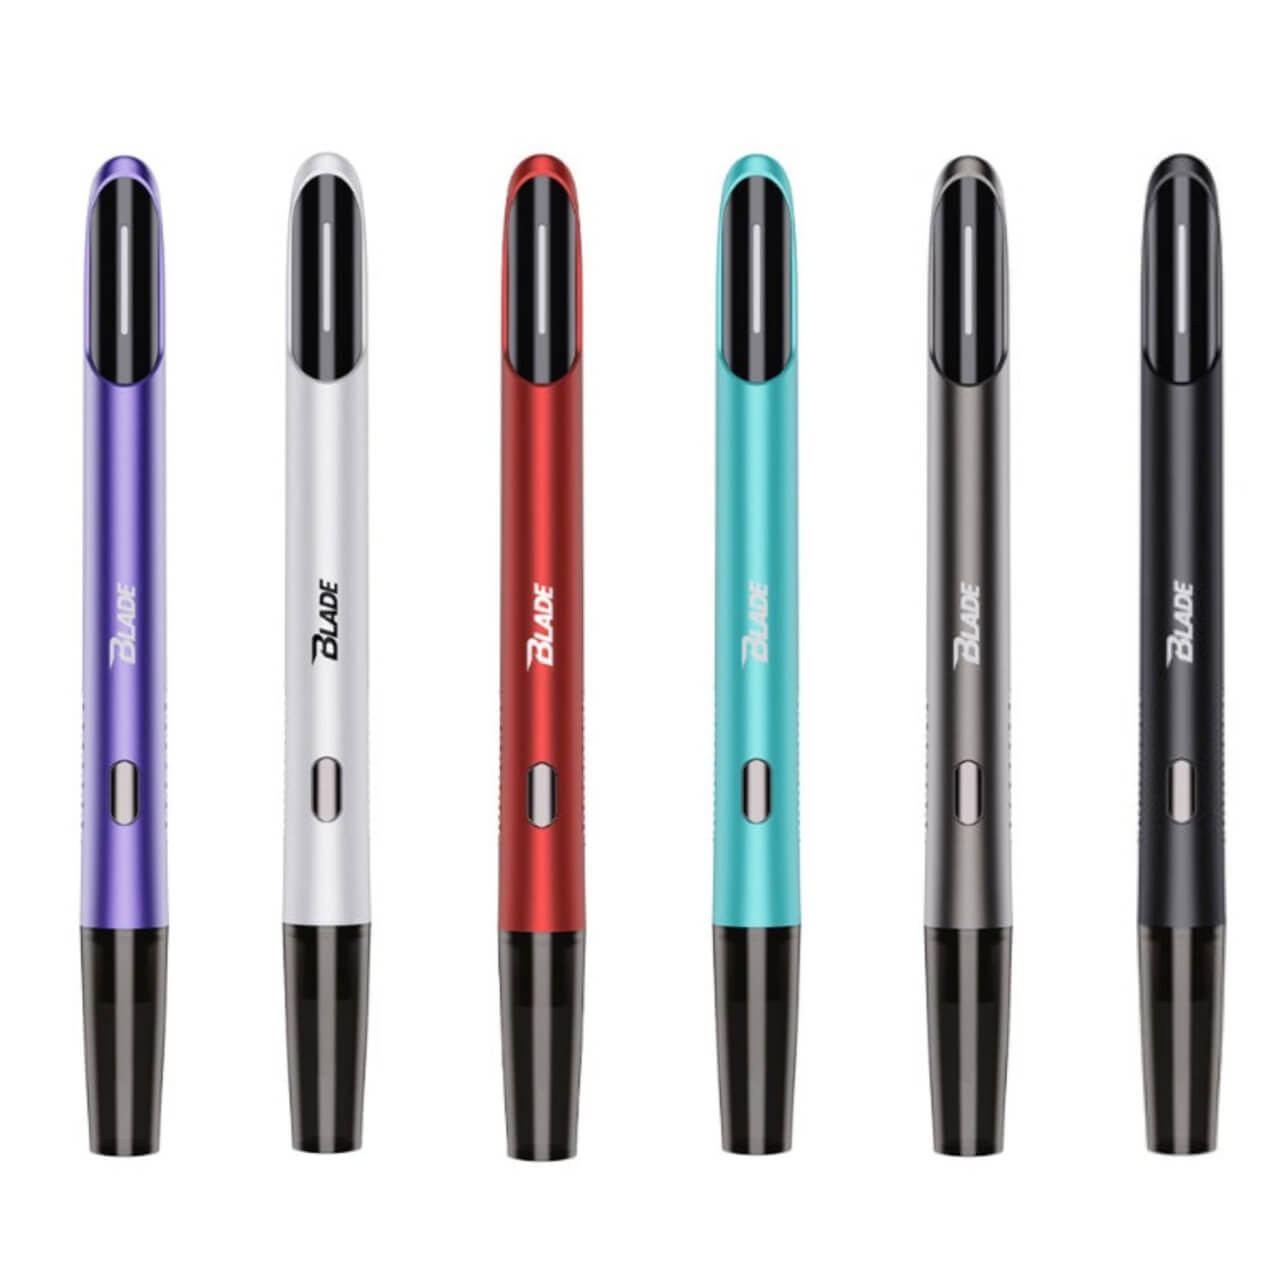 VAPORIZERS By Ecigmafia-Comprehensive Review of the Finest Vaporizers on the Market